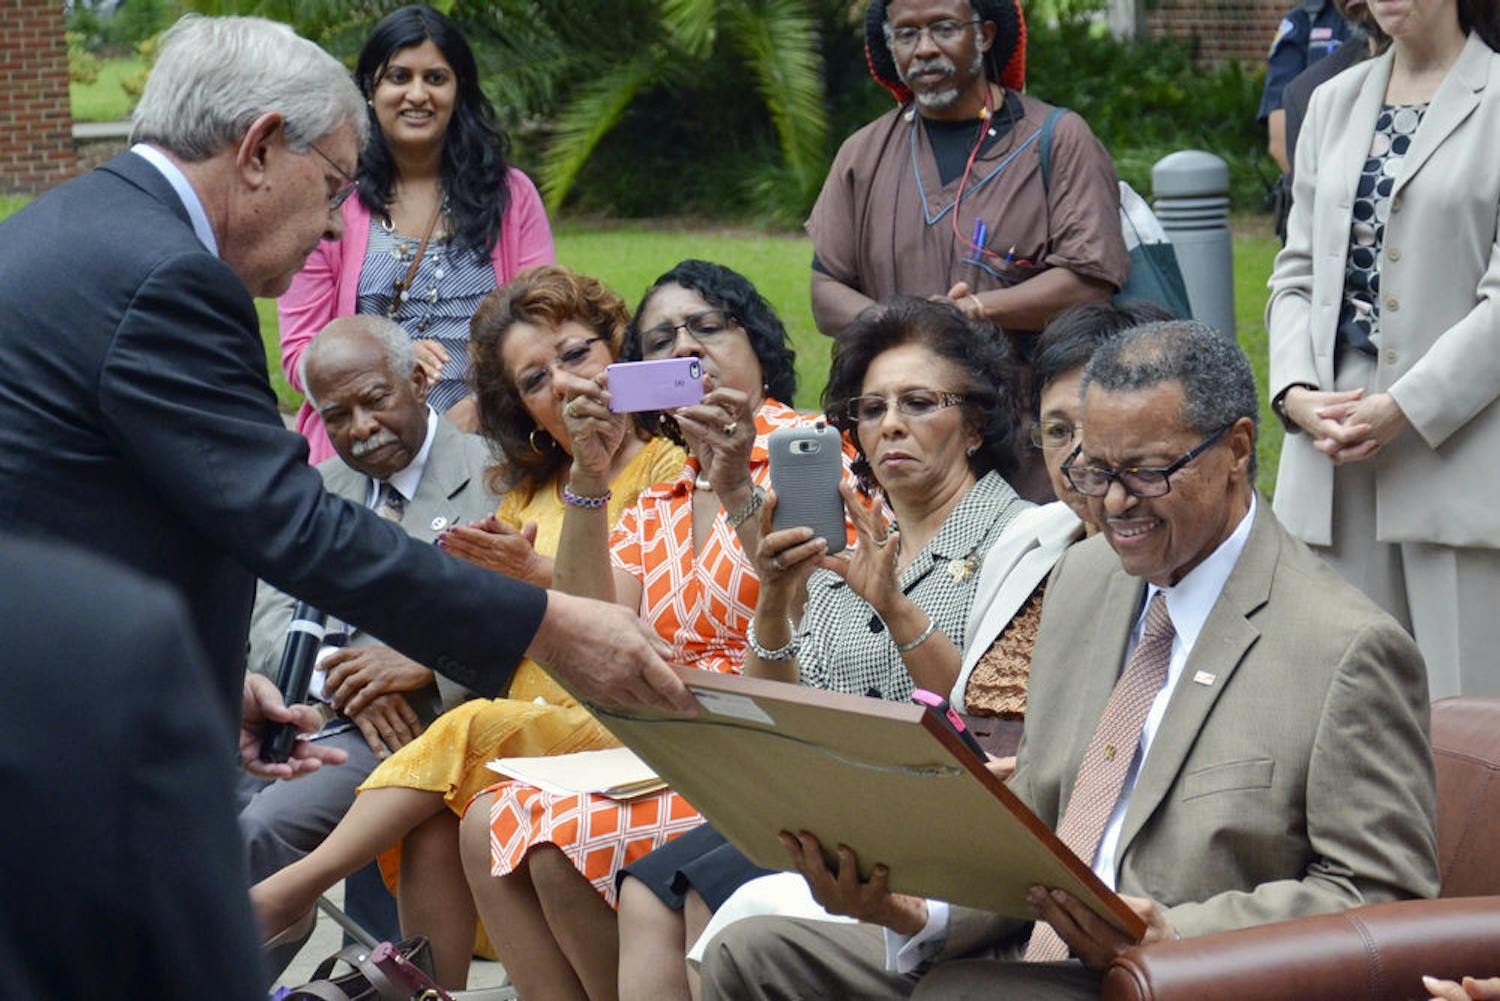 Judge Stephan P. Mickle, the first African-American to get a bachelor’s degree from UF and the second to graduate from UF’s Levin College of Law, smiles as he receives a plaque from George Dawson, the law school’s interim dean, during a tree dedication ceremony in 2015. About 75 people attended the ceremony on the UF Law West Courtyard.